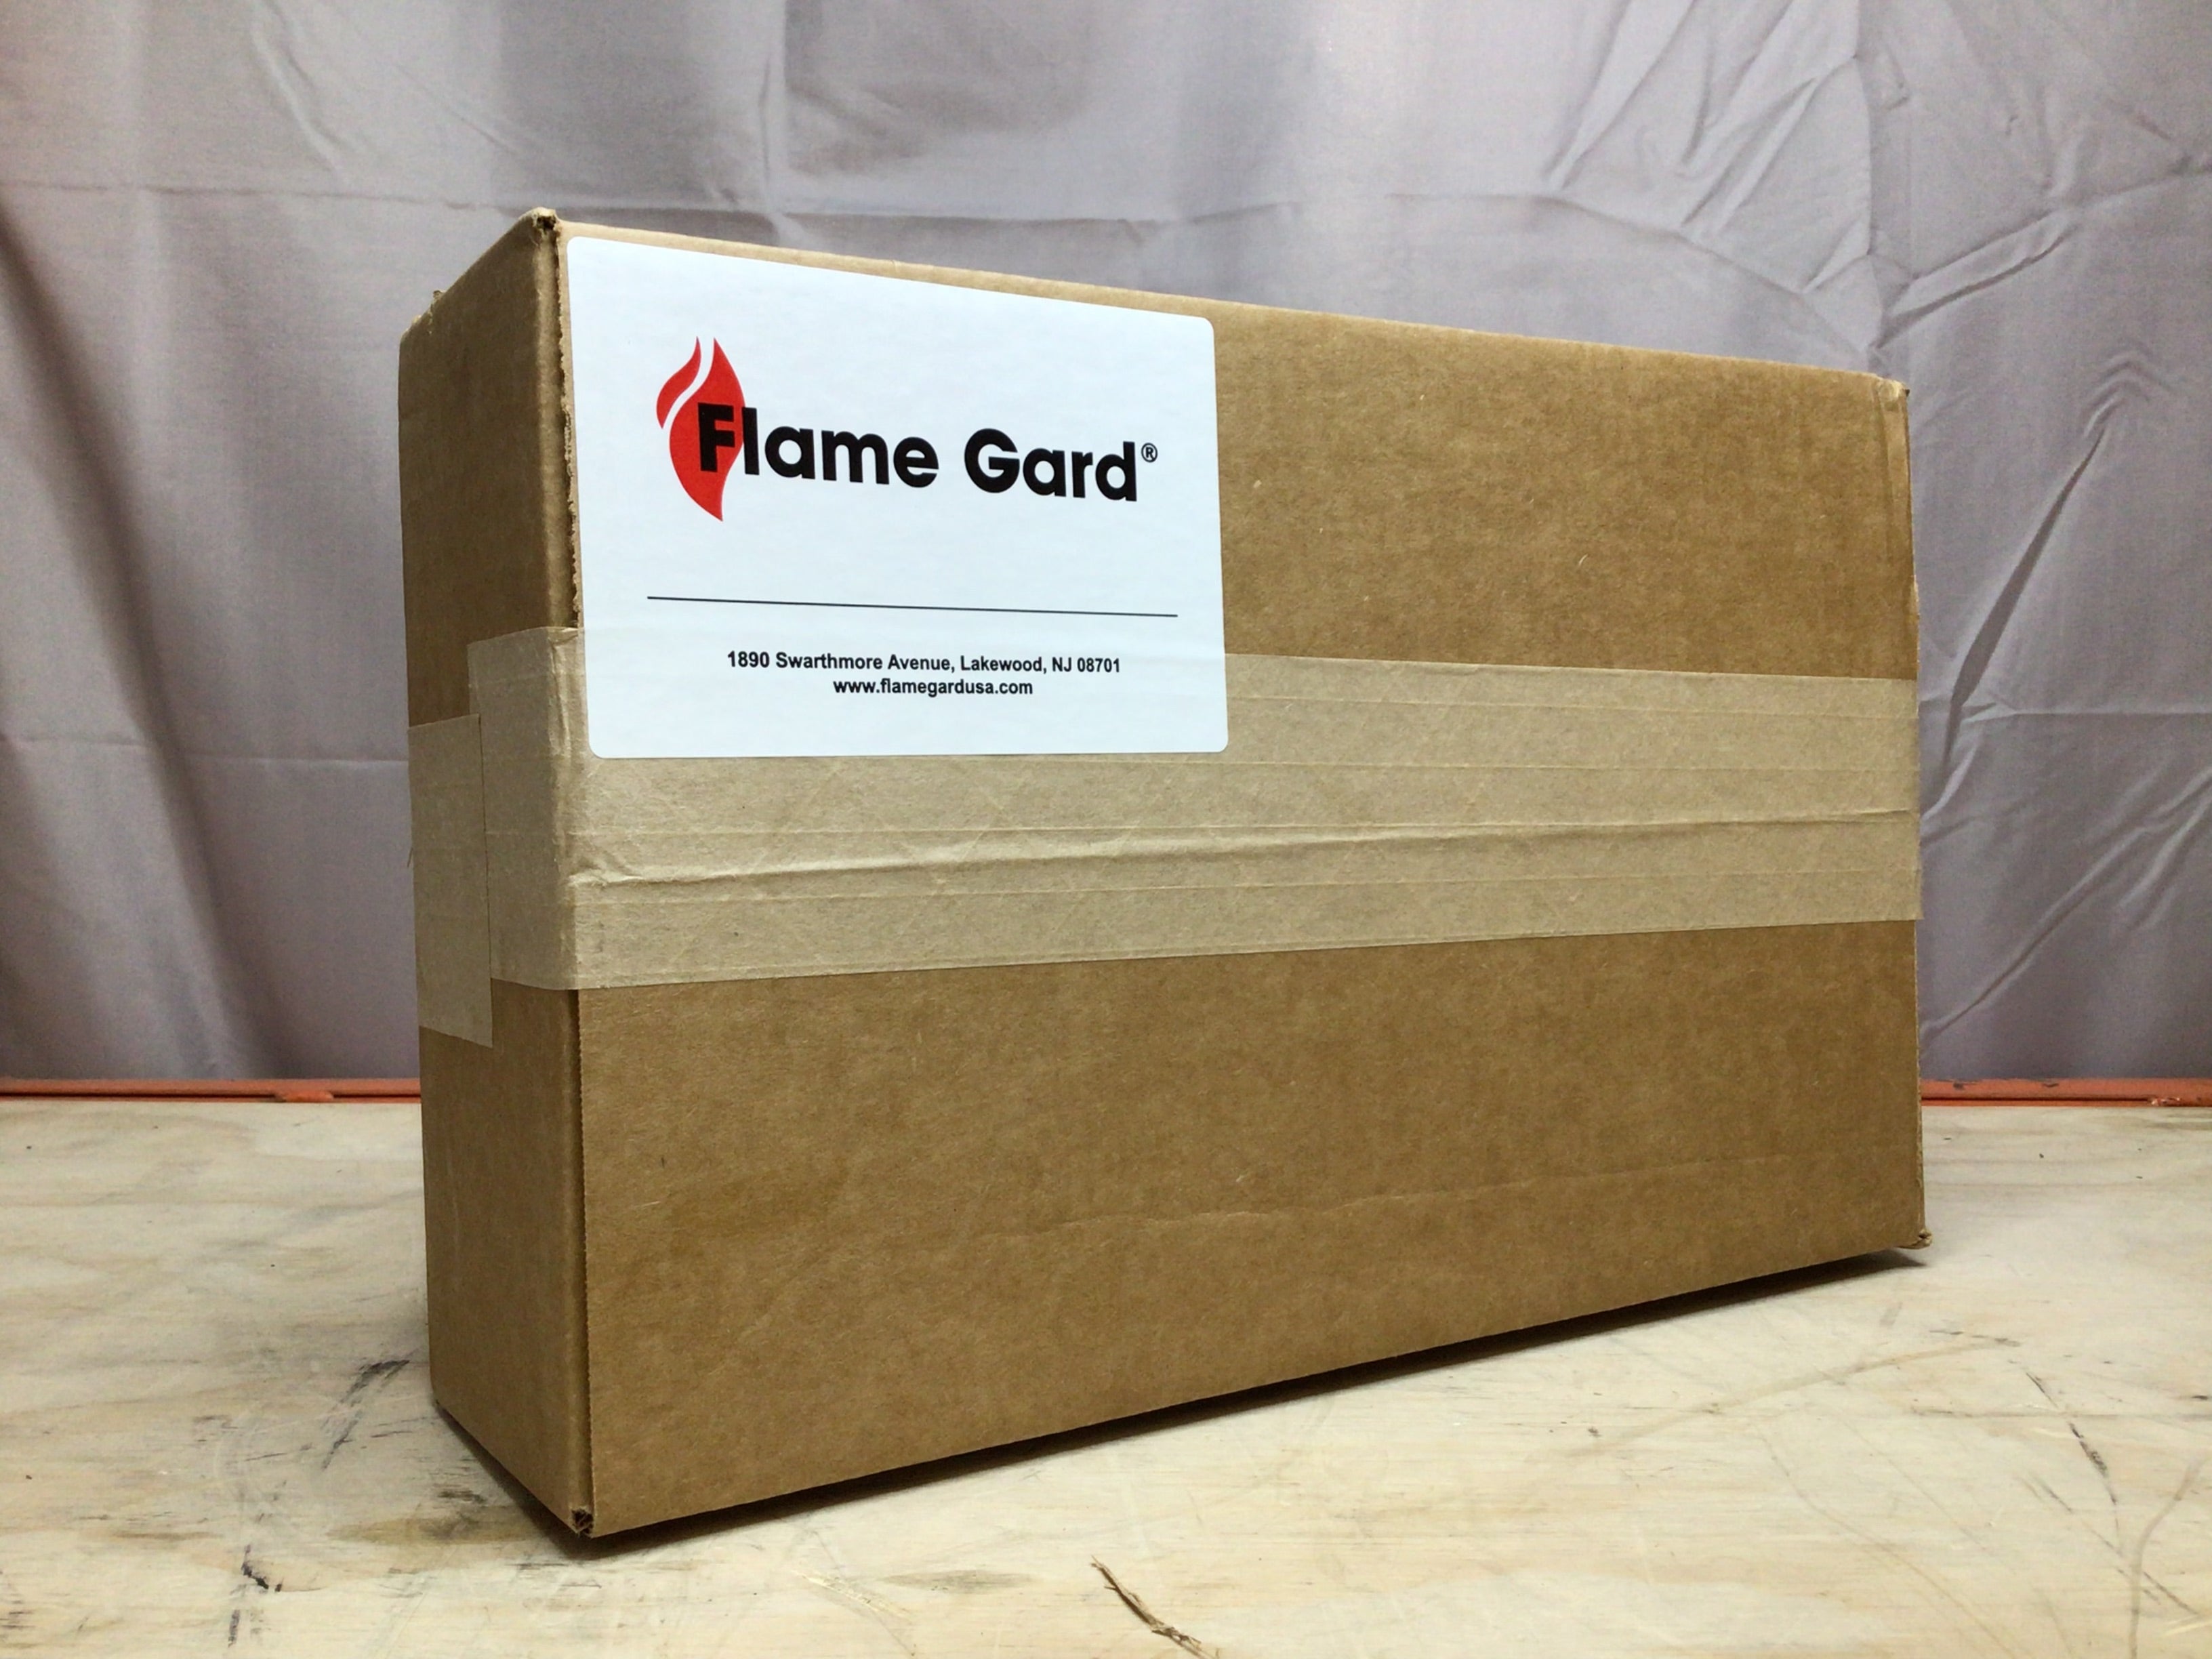 COMPONENT HARDWARE Flame Gard 750712 Flat Grease Duct Access Door 7 in x 12 in (8131066691822)